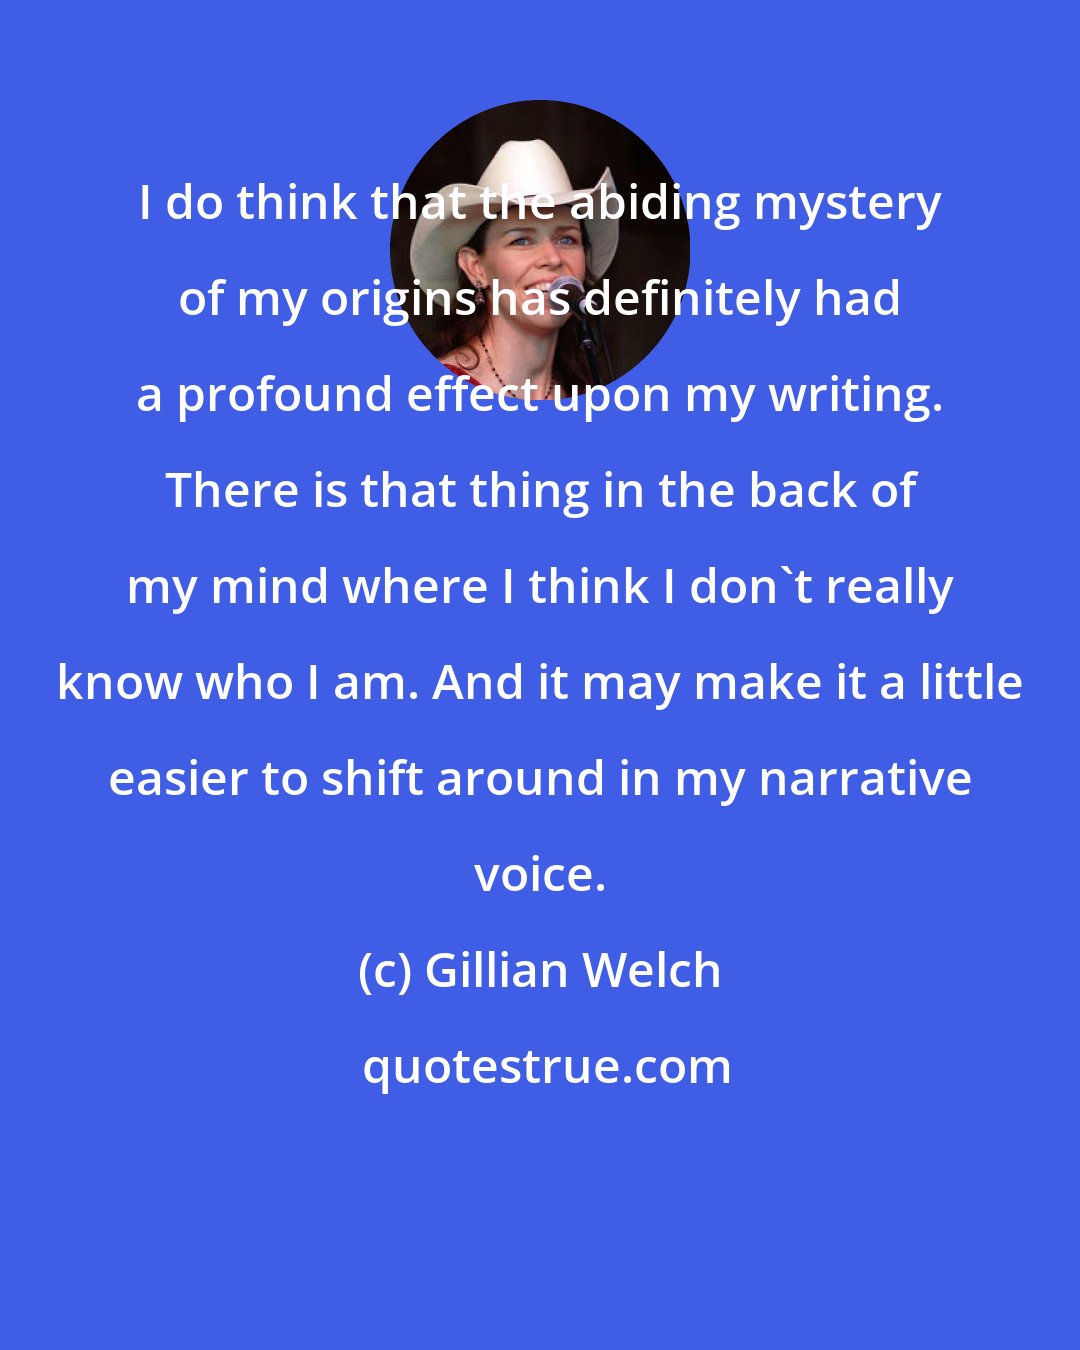 Gillian Welch: I do think that the abiding mystery of my origins has definitely had a profound effect upon my writing. There is that thing in the back of my mind where I think I don't really know who I am. And it may make it a little easier to shift around in my narrative voice.